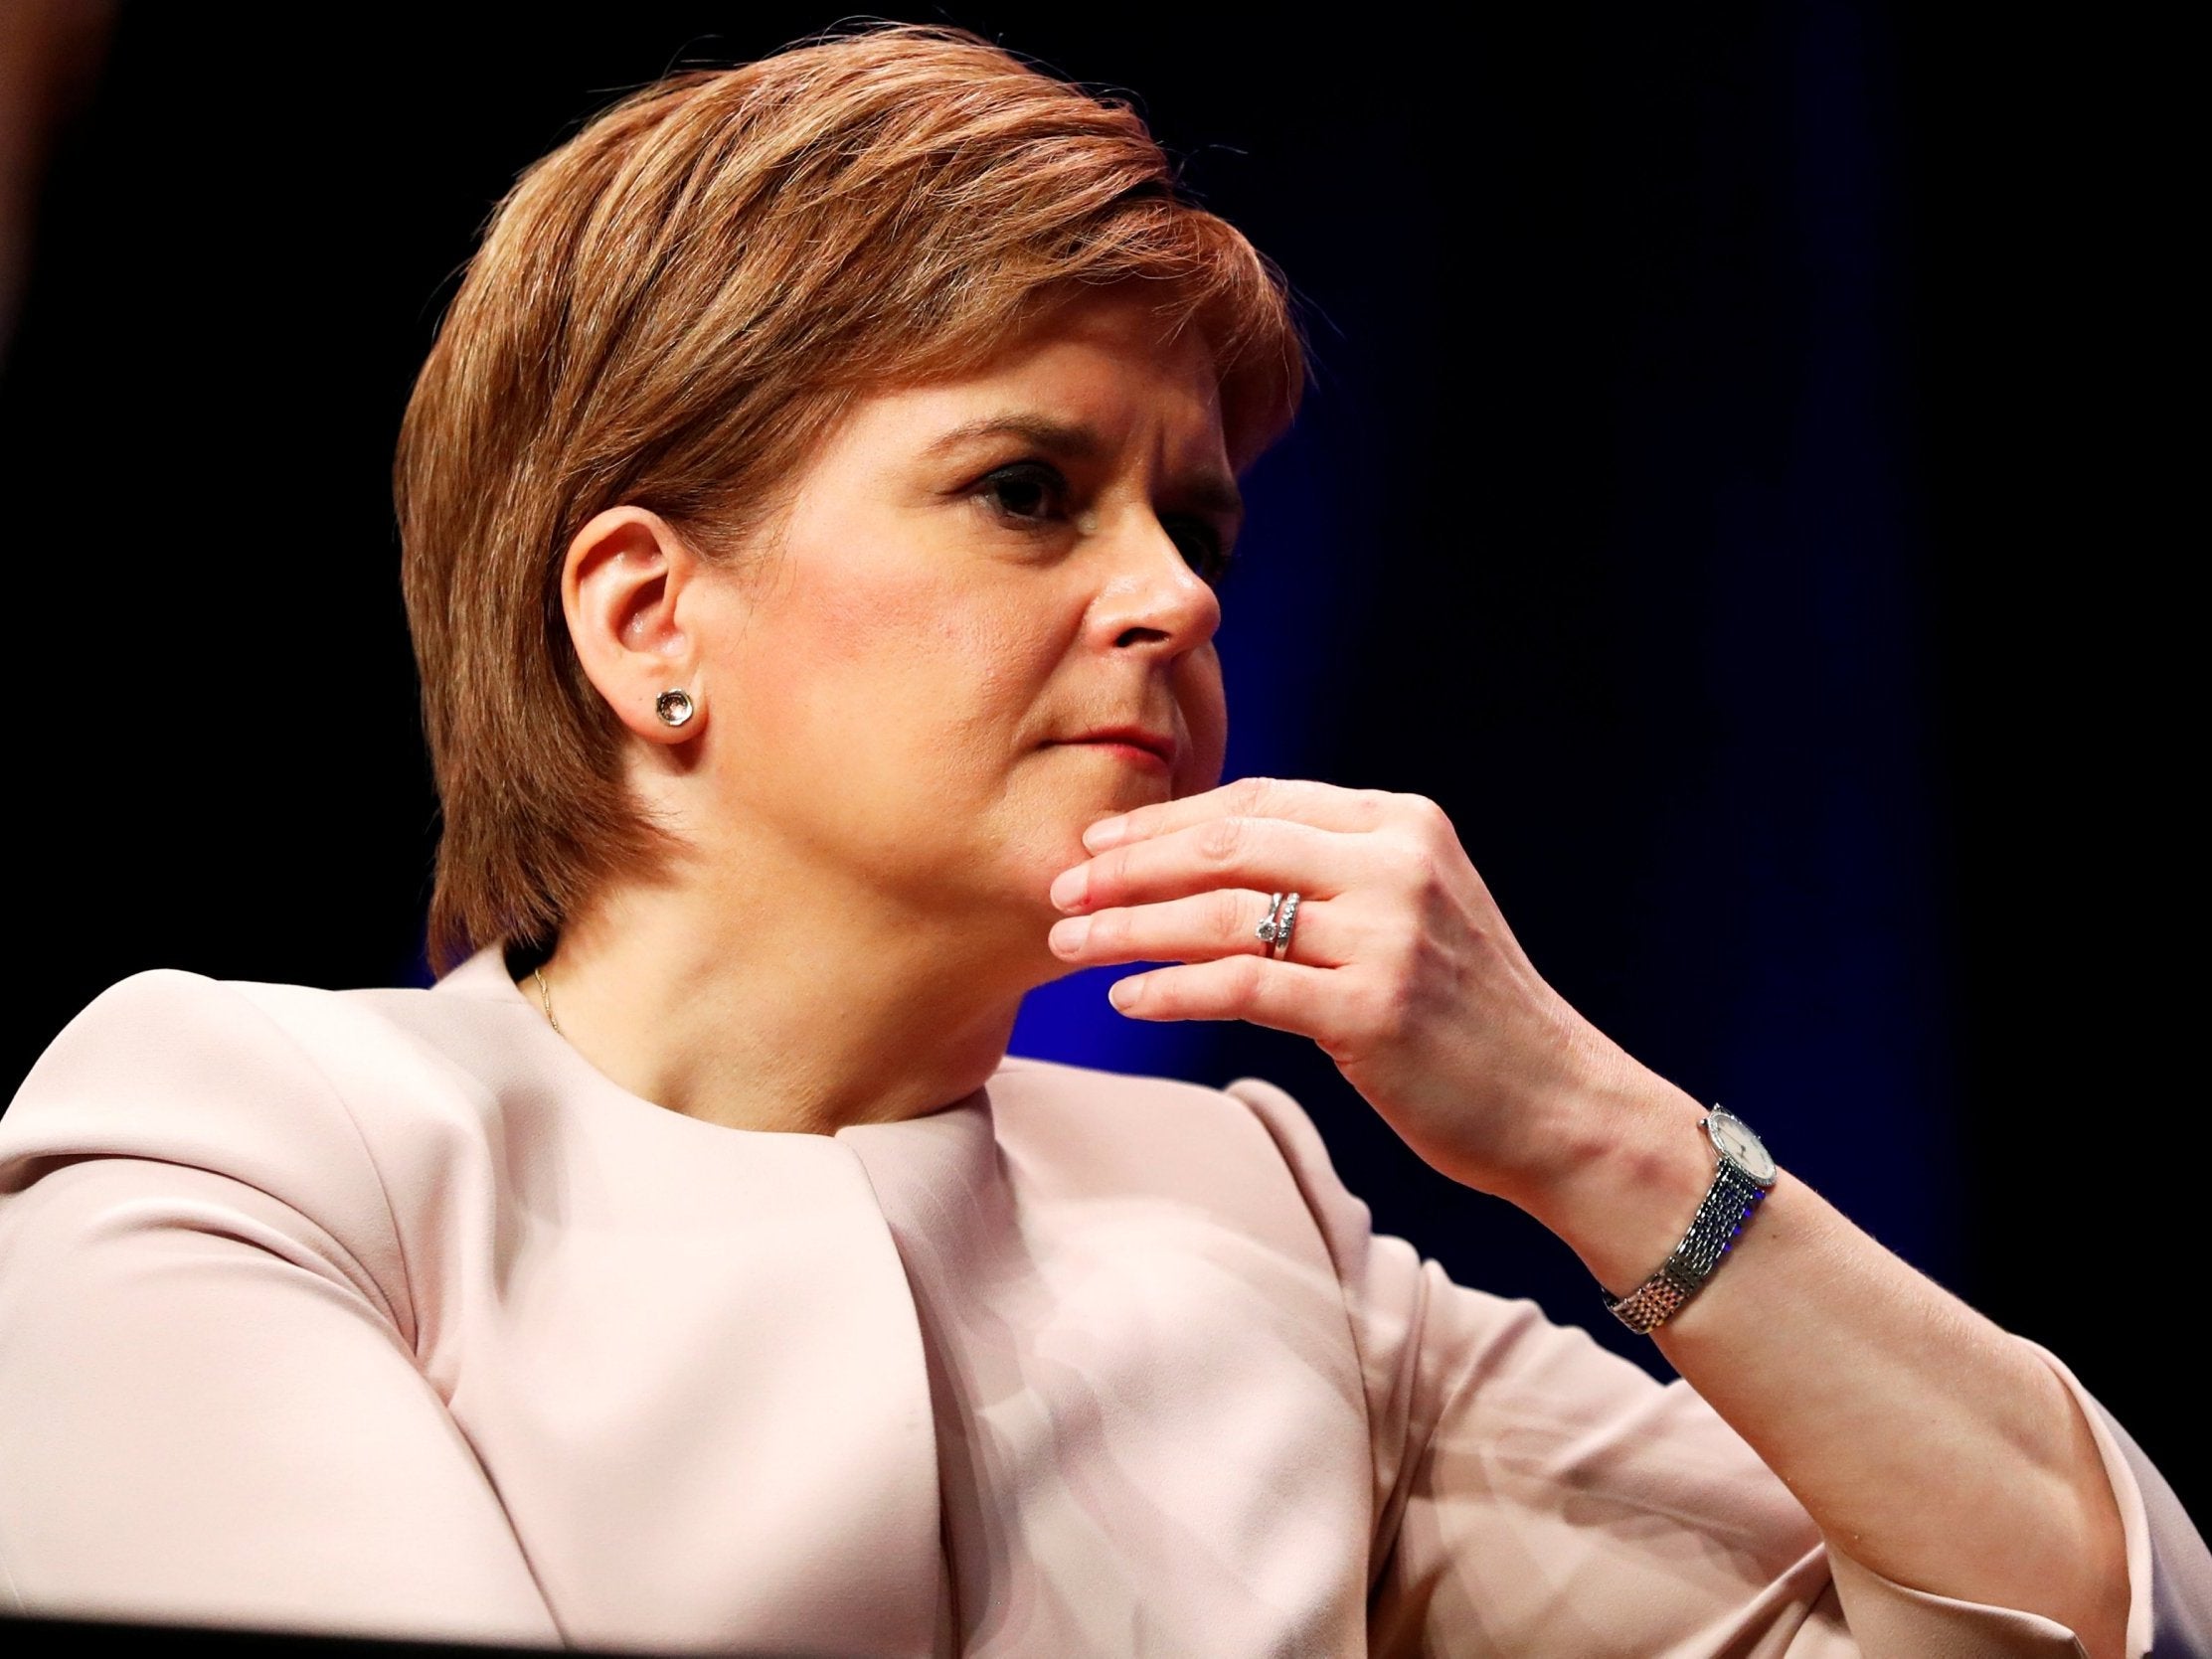 Ms Sturgeon was set to speak at conference opening